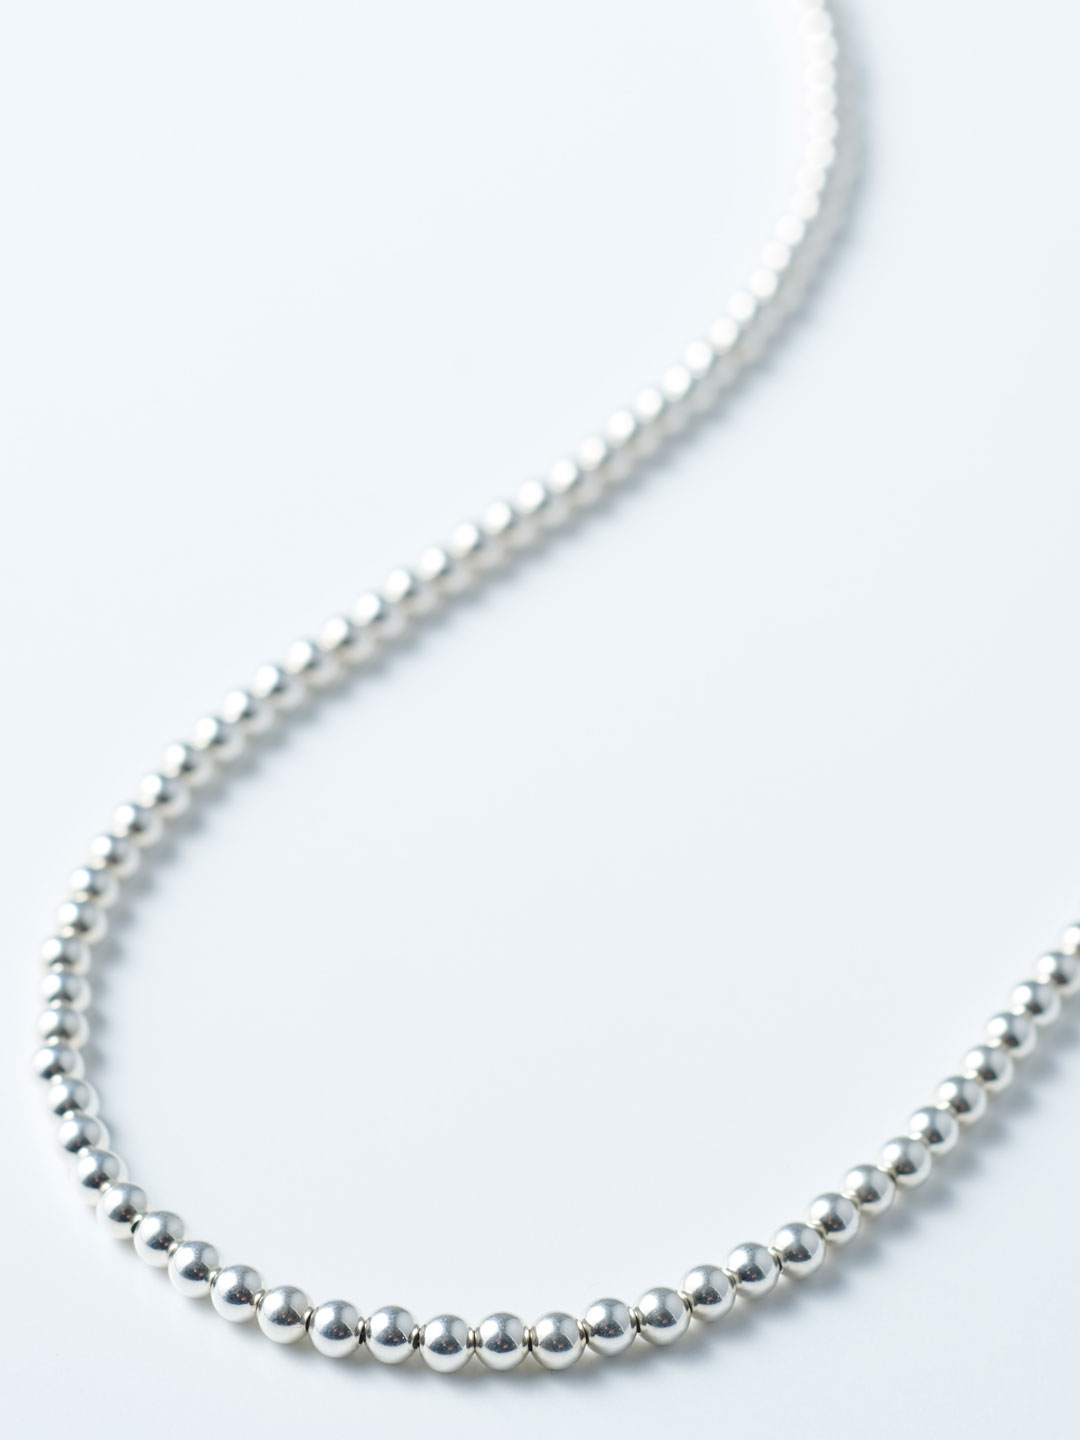 4mm Ball Chain Necklace 150cm  - Silver